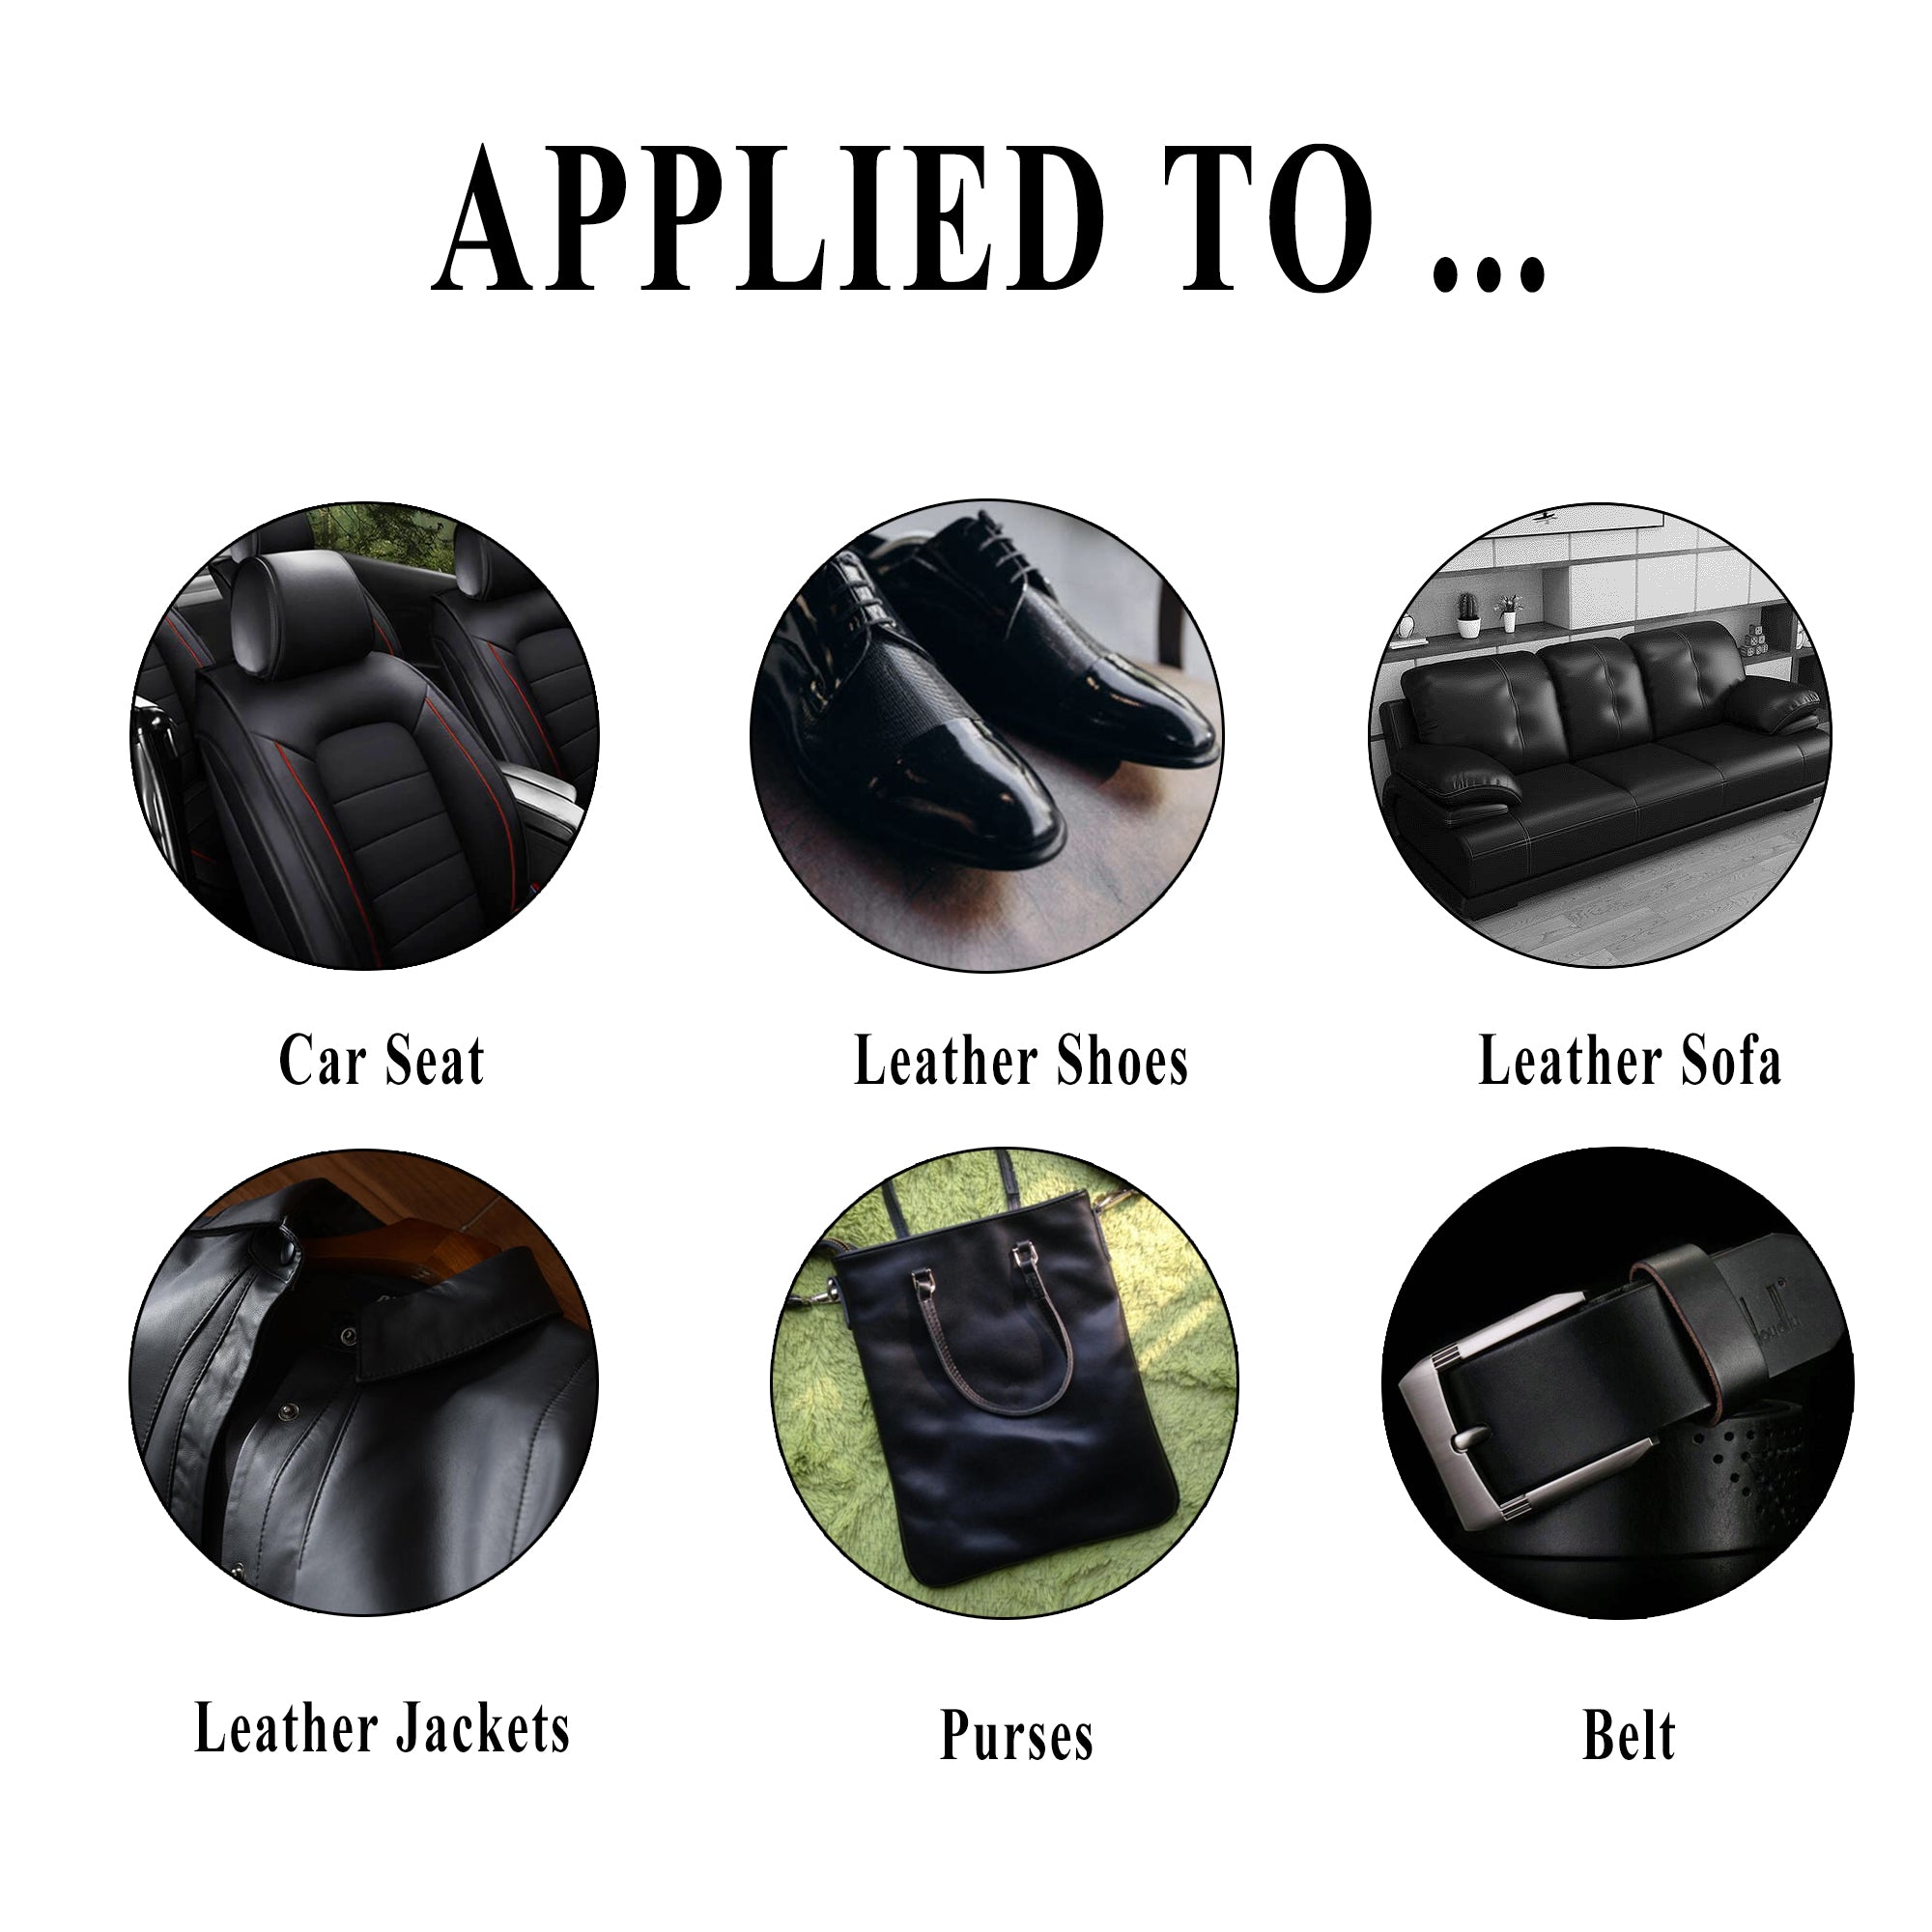 Endhokn Black Leather Repair Kit Vinyl Repair Kit-Furniture Sofa, Car Seat,  Leather Clothing, Leather Bag, Belt, Suitcase, Leather Gloves and Other